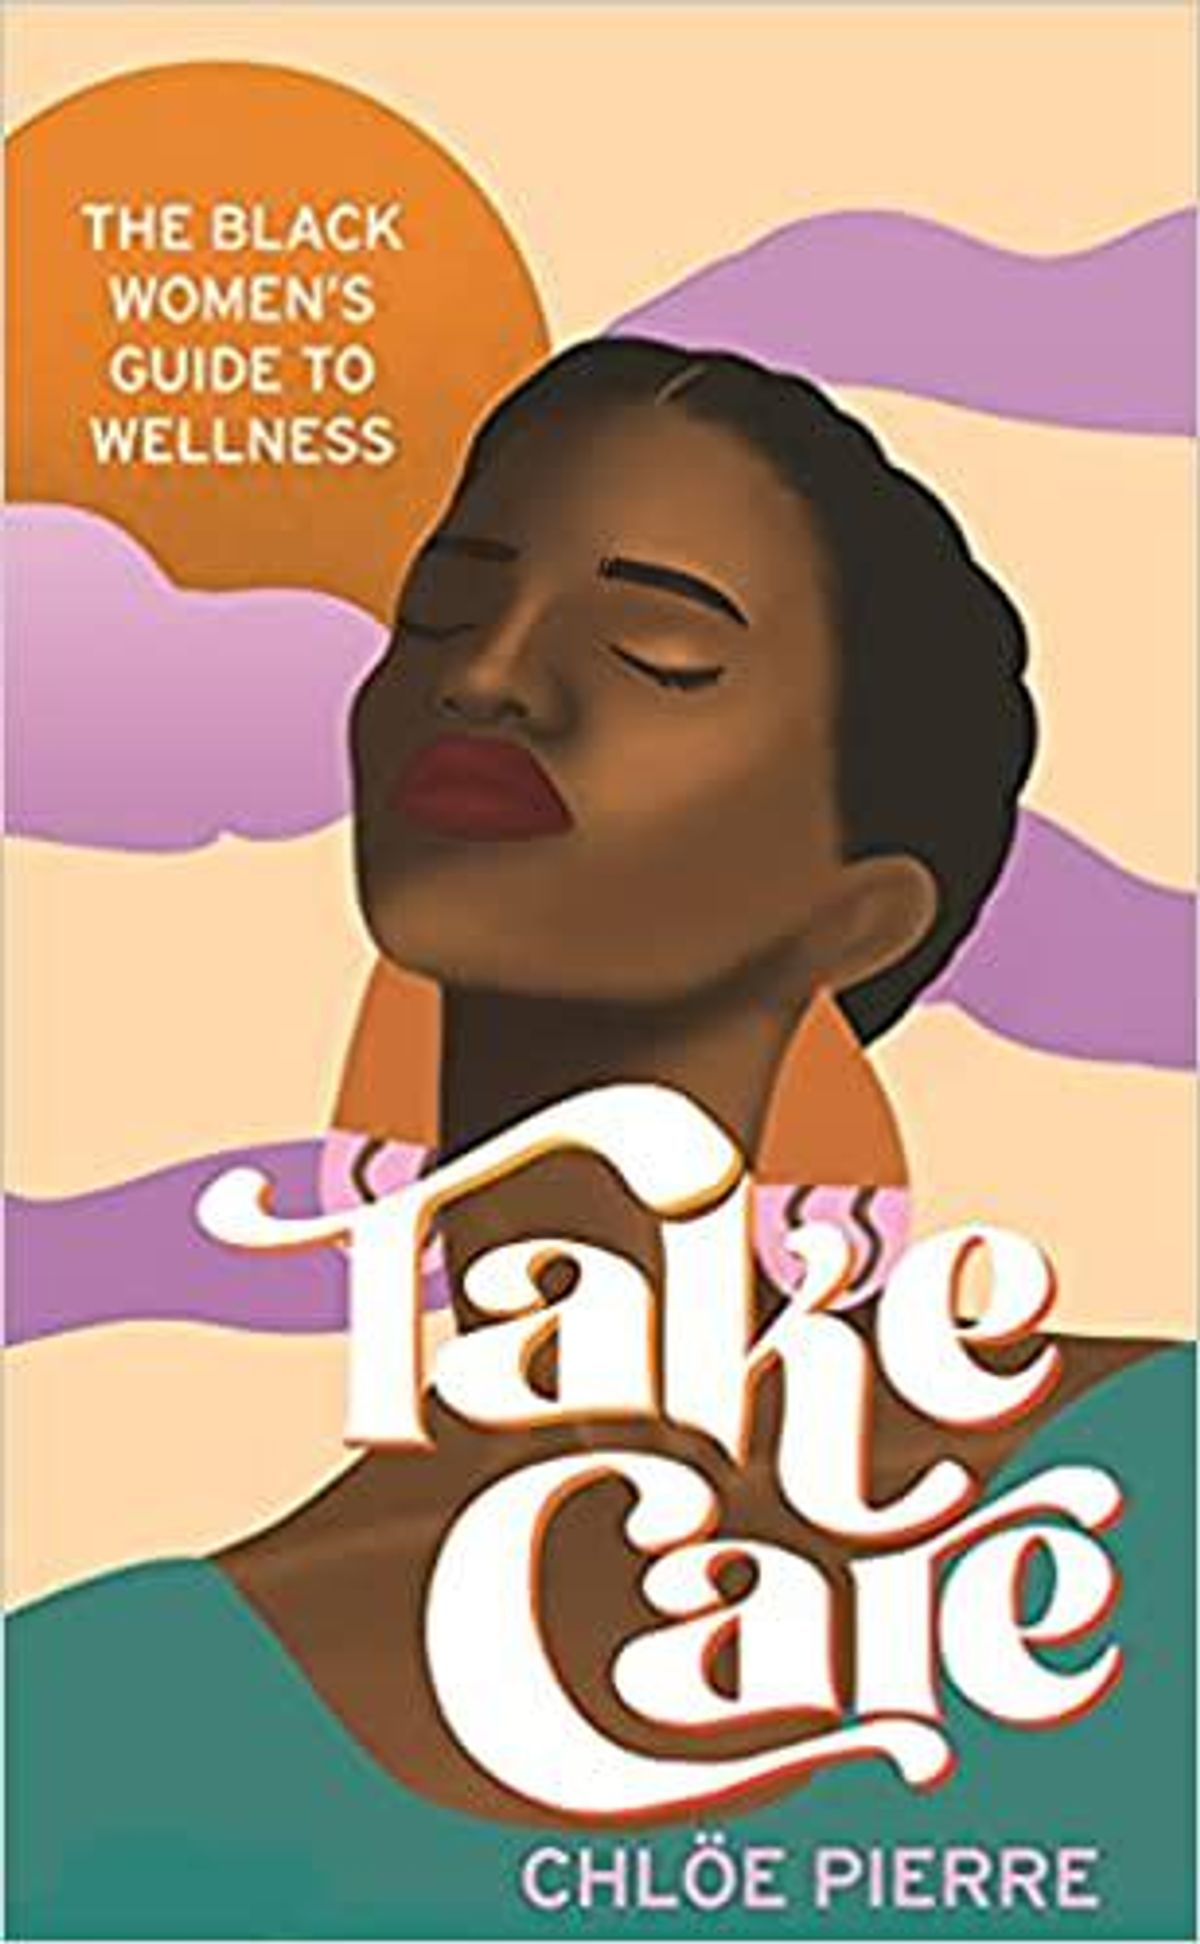 Take Care: The Black Women's Guide to Wellness, by Chloé Pierre